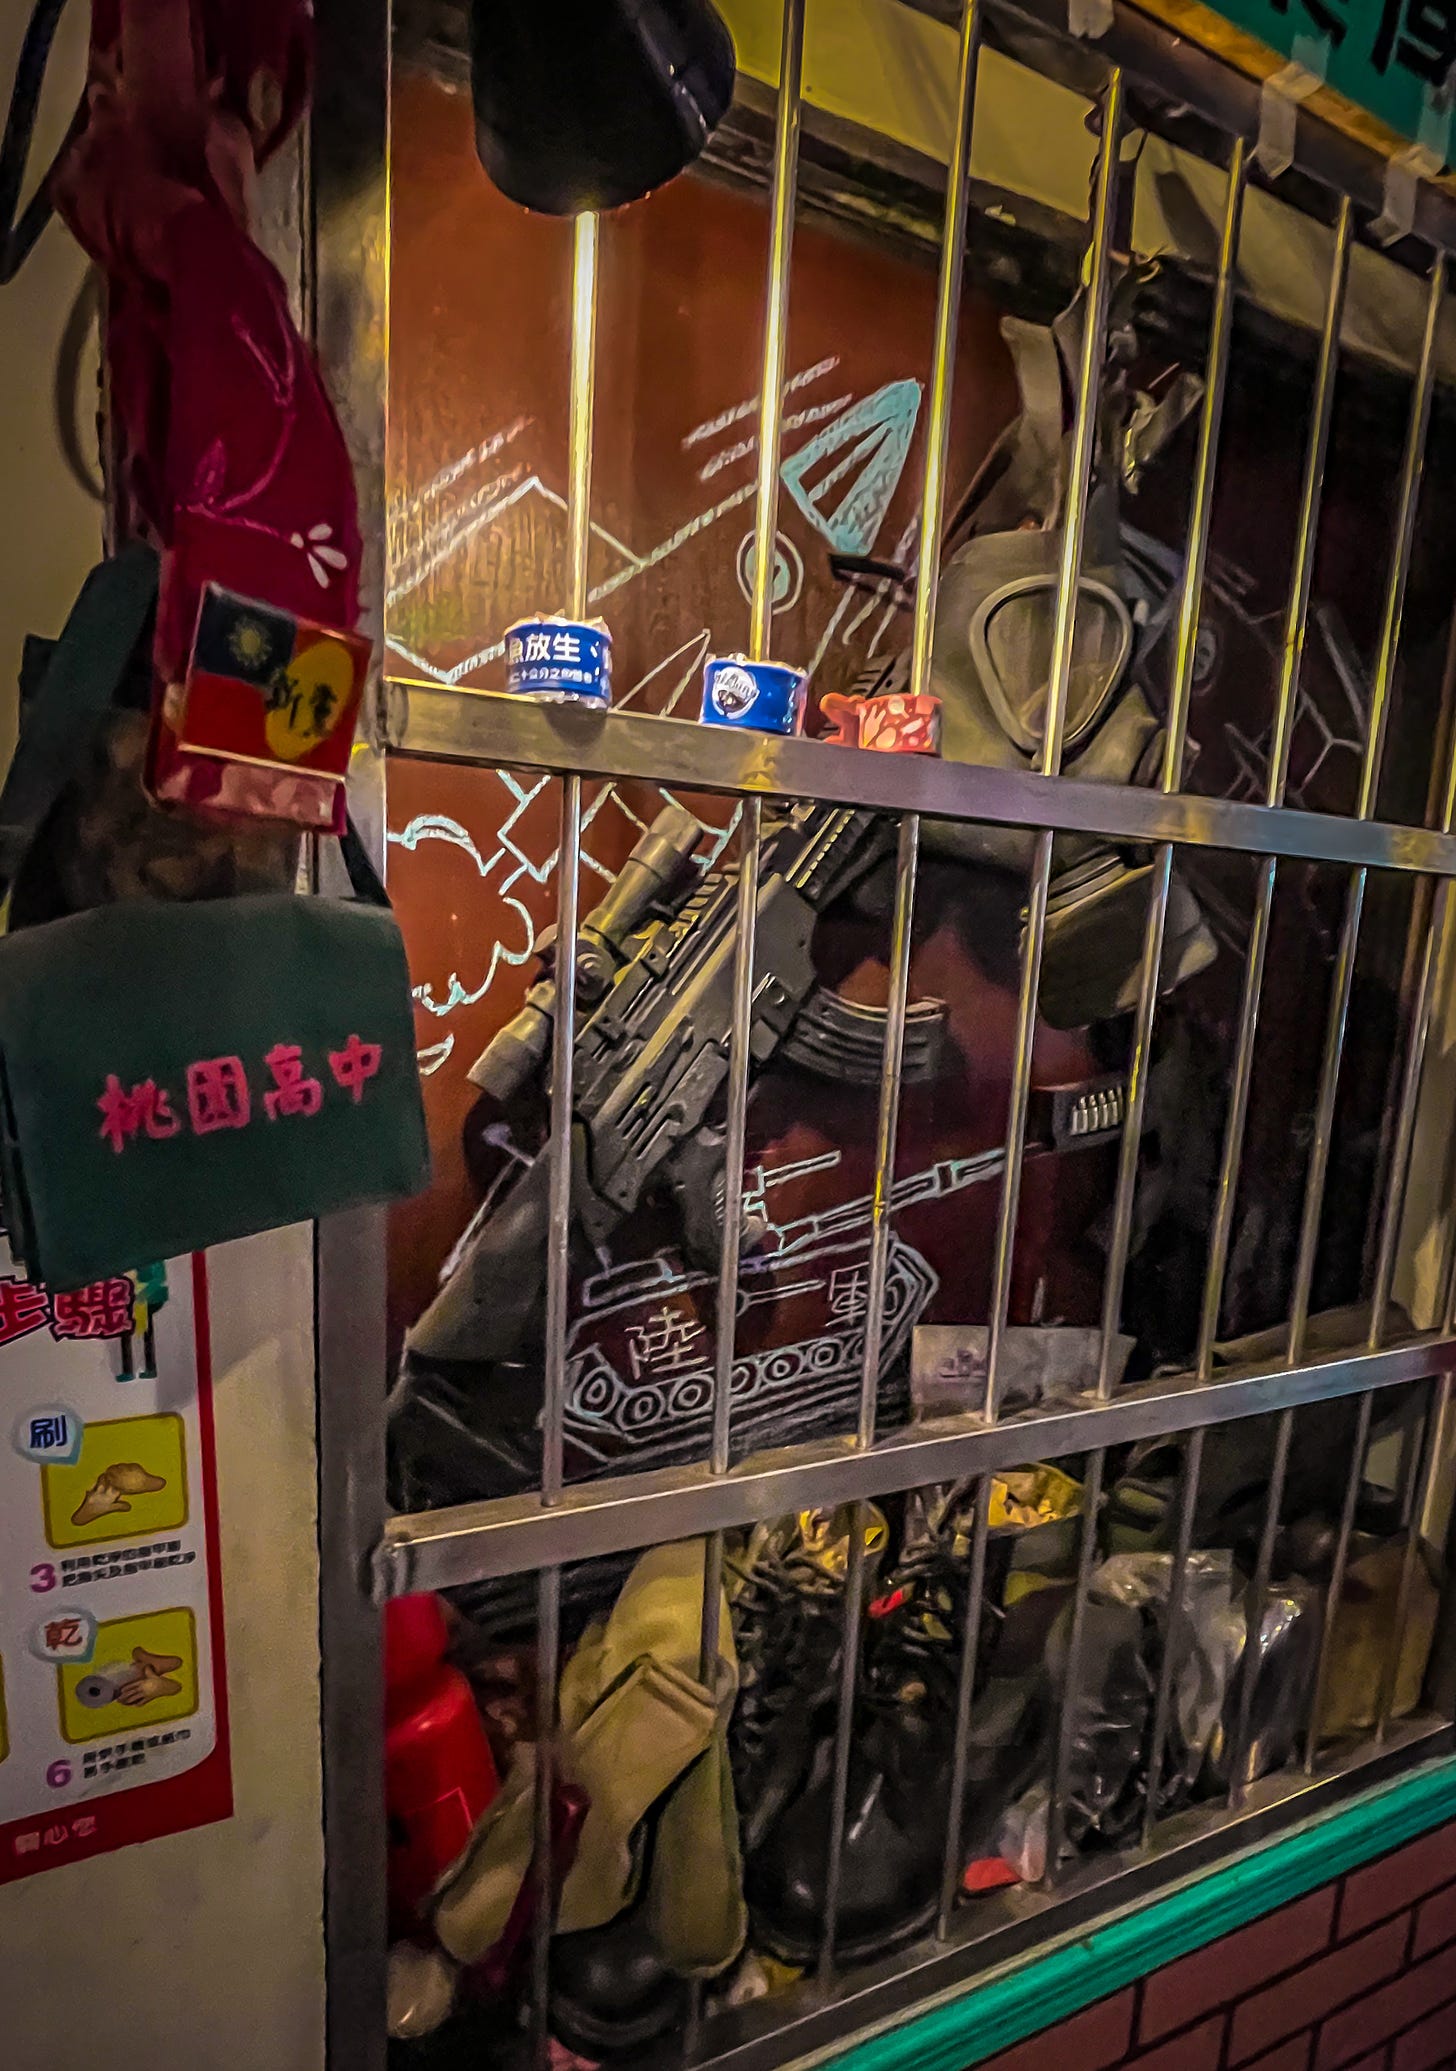 A Taiwanese army-issue machine gun and gas mask hang in a locked display case in the dining room of Army Diner in Taoyuan